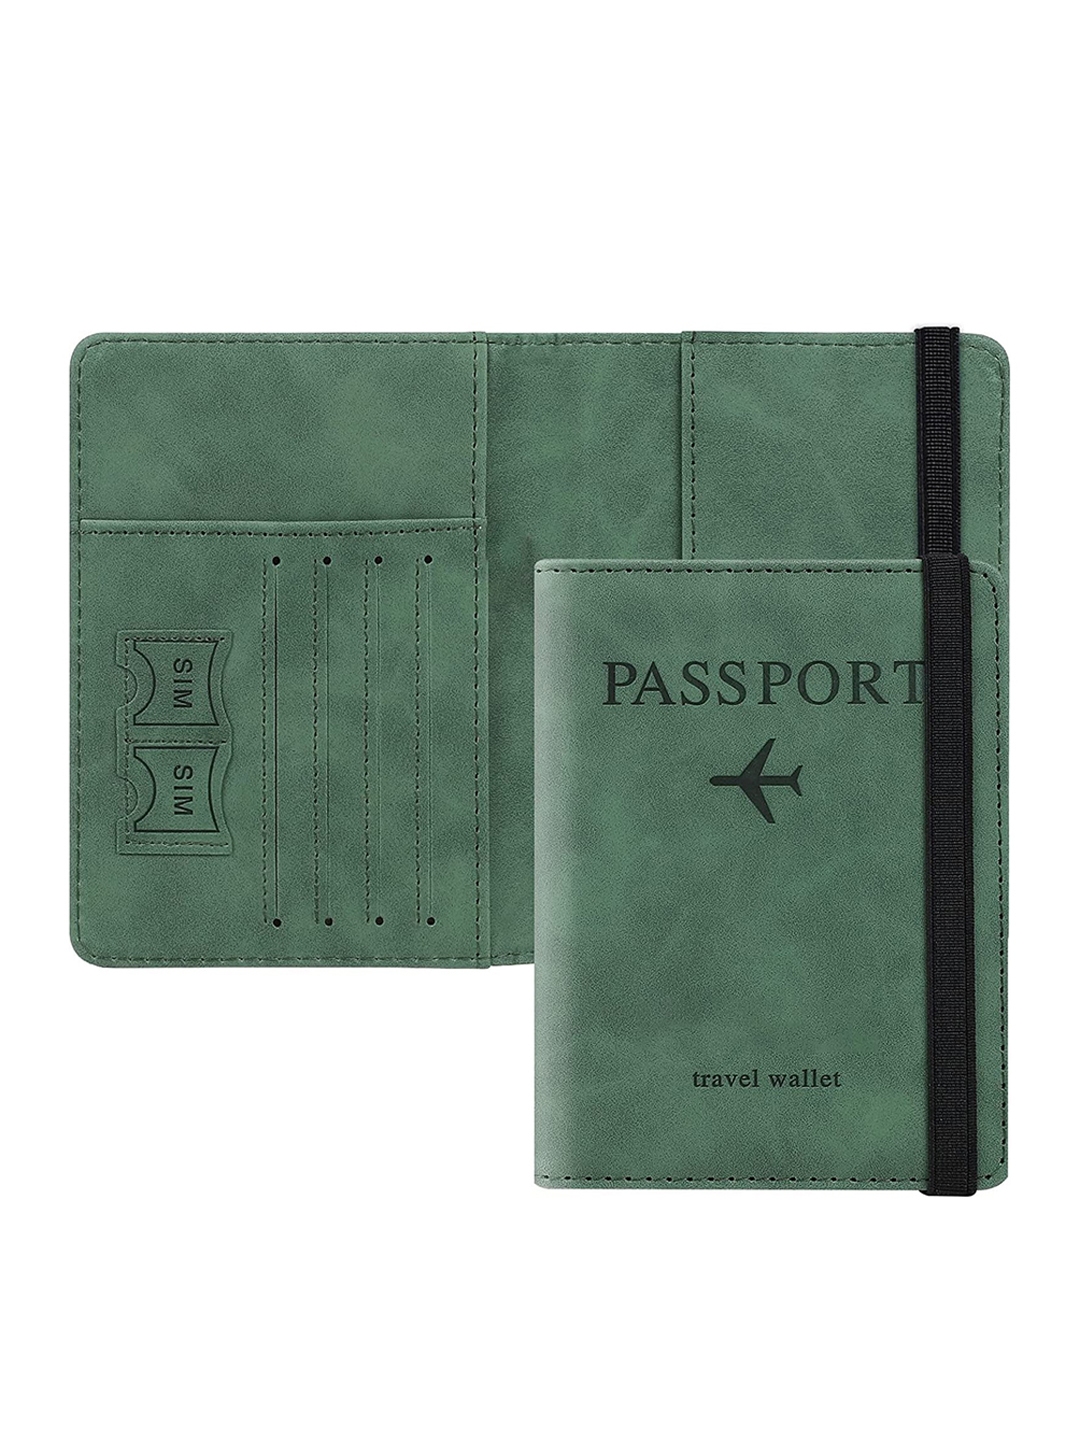 Buy House of Quirk Document Holder Travel Passport Wallet Holder - Orange  Online at Low Prices in India 